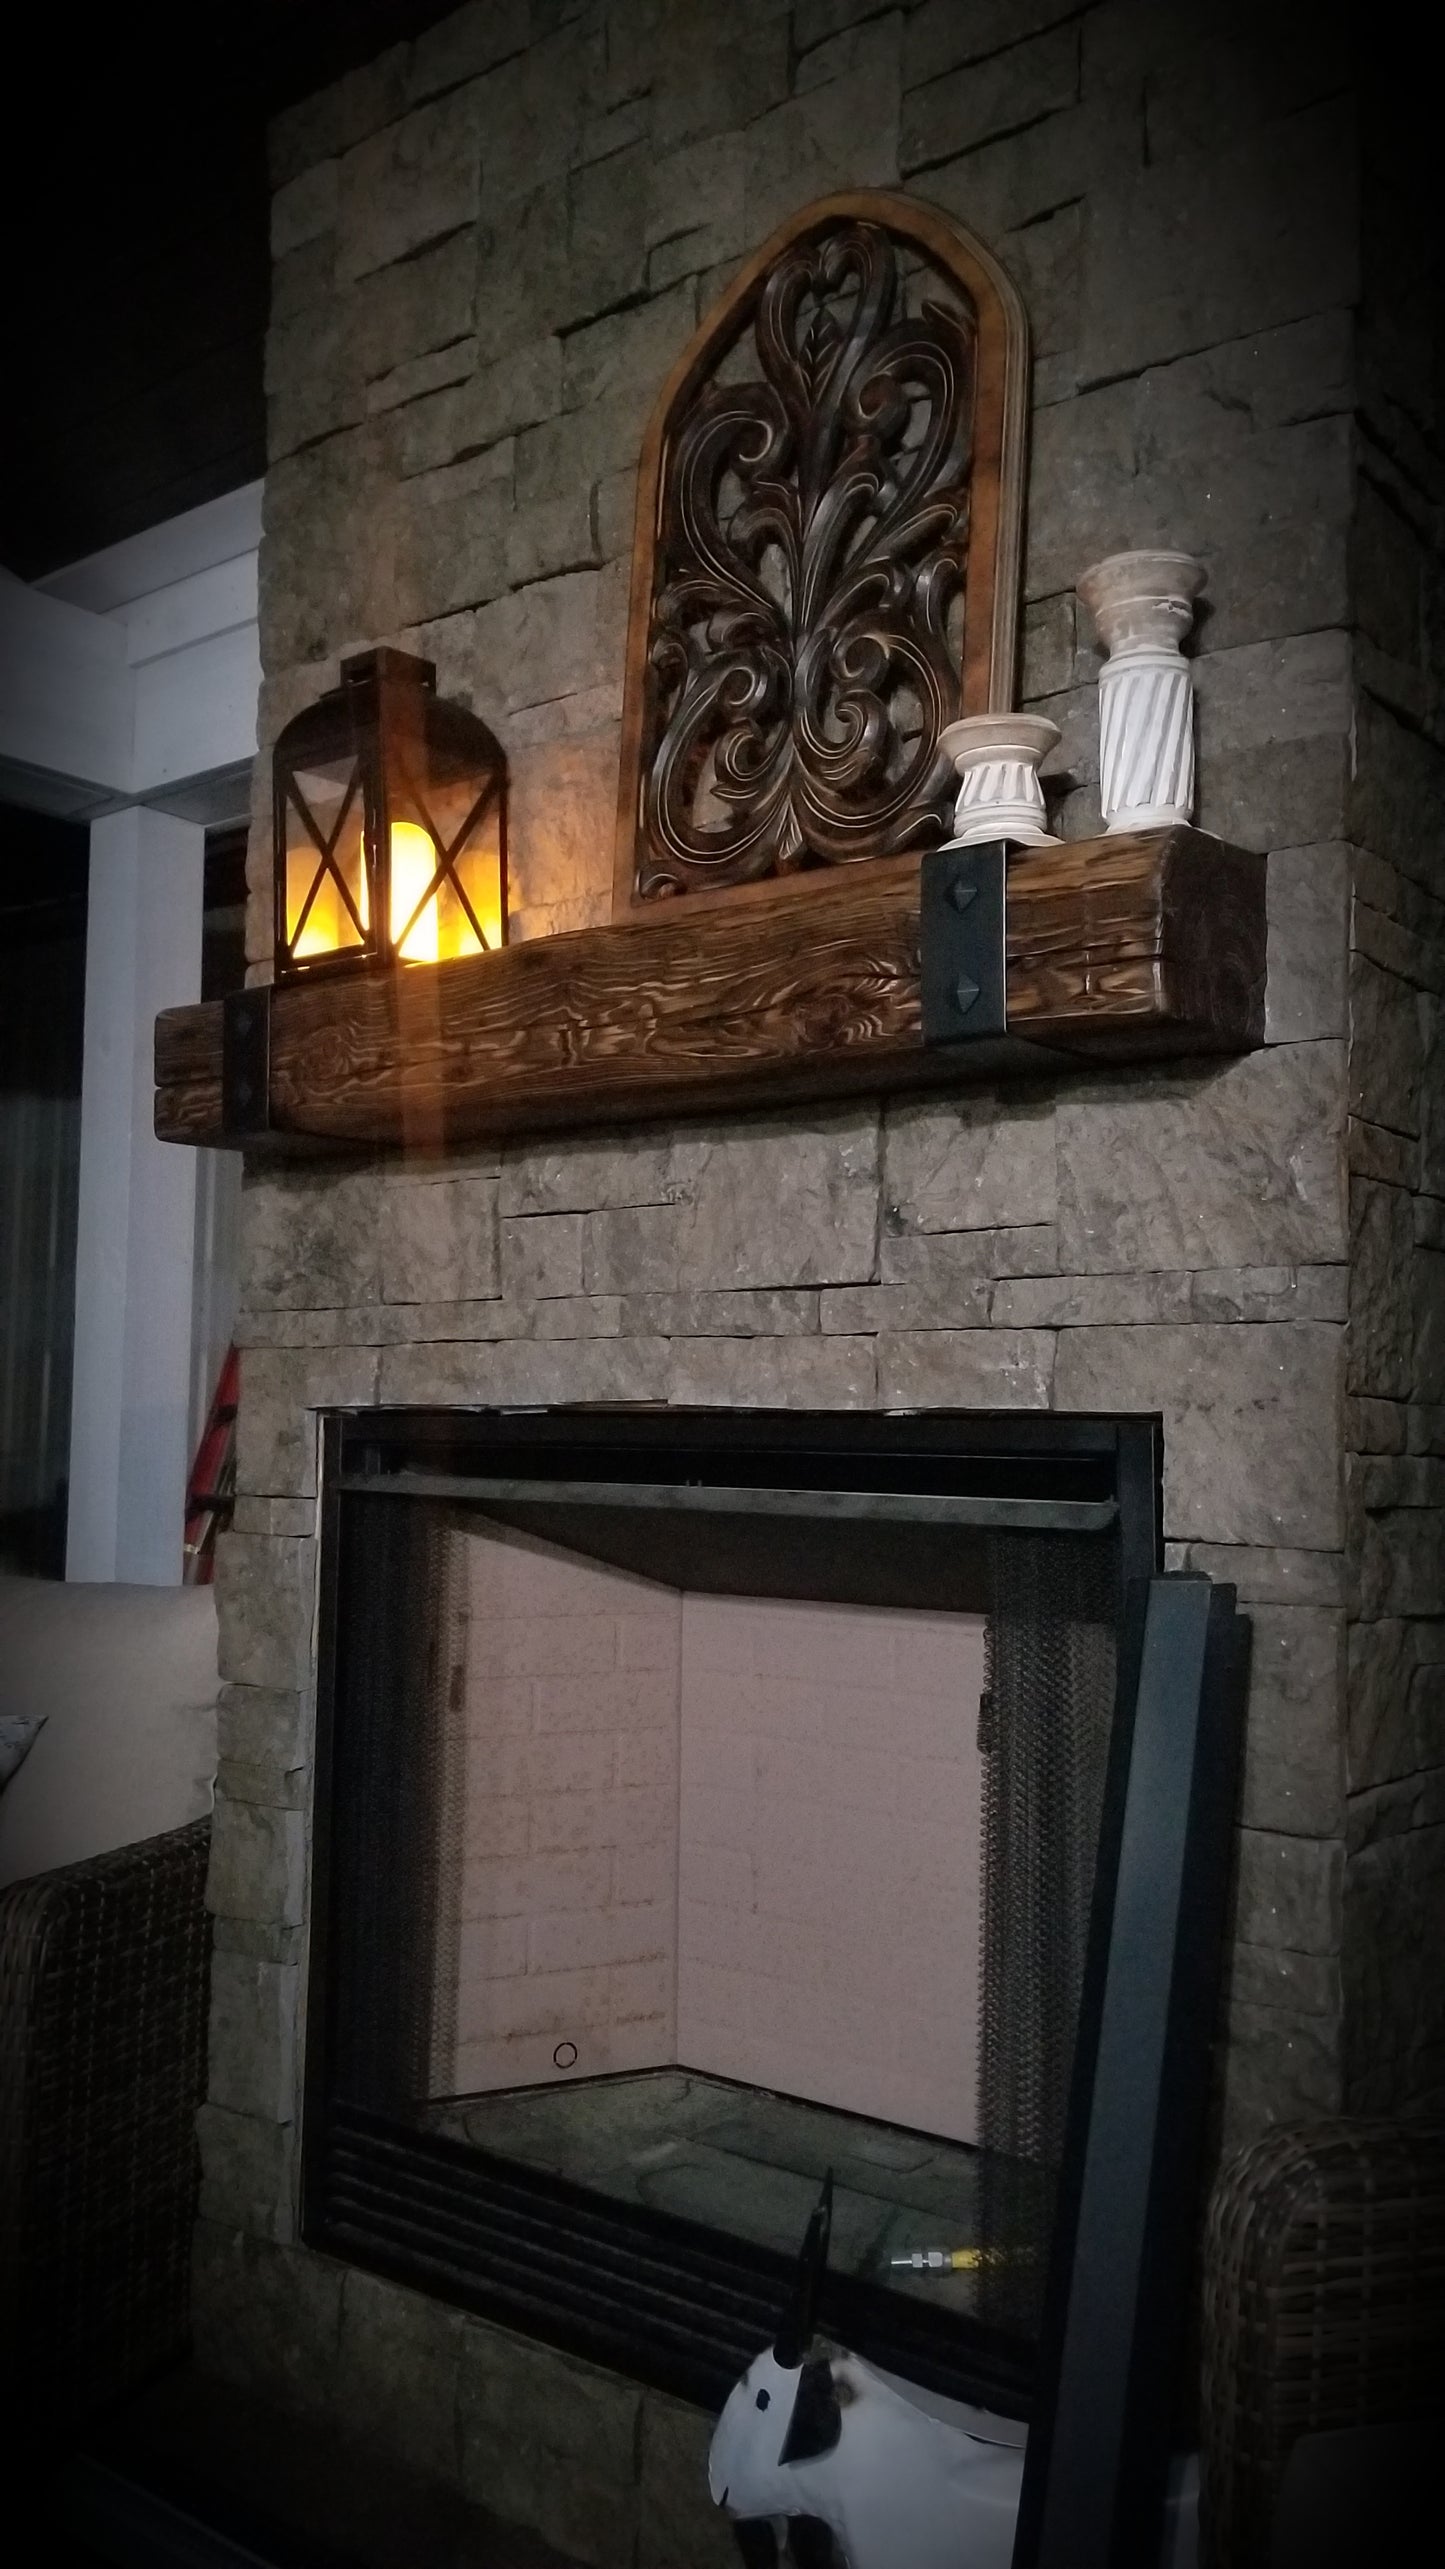 REAL BEAM 6" x 8" Reclaimed wood beam fireplace mantel with iron brackets